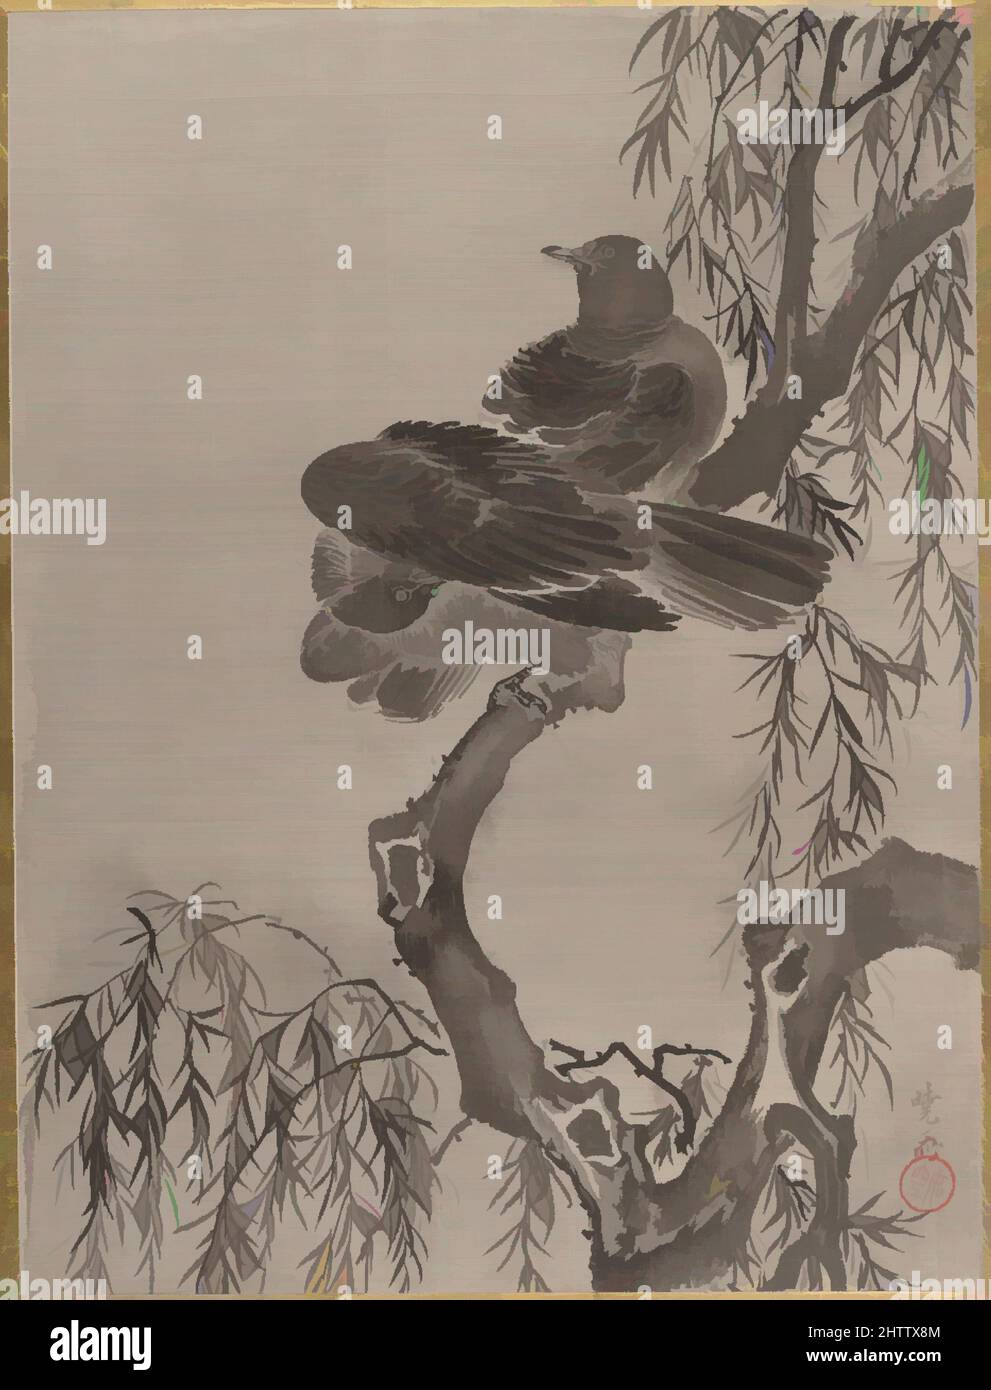 Art inspired by Two Birds on a Branch, Meiji period (1868–1912), ca. 1887, Japan, Album leaf; ink and color on silk, 14 1/4 x 10 5/8 in. (36.2 x 27 cm), Paintings, Kawanabe Kyōsai (Japanese, 1831–1889, Classic works modernized by Artotop with a splash of modernity. Shapes, color and value, eye-catching visual impact on art. Emotions through freedom of artworks in a contemporary way. A timeless message pursuing a wildly creative new direction. Artists turning to the digital medium and creating the Artotop NFT Stock Photo